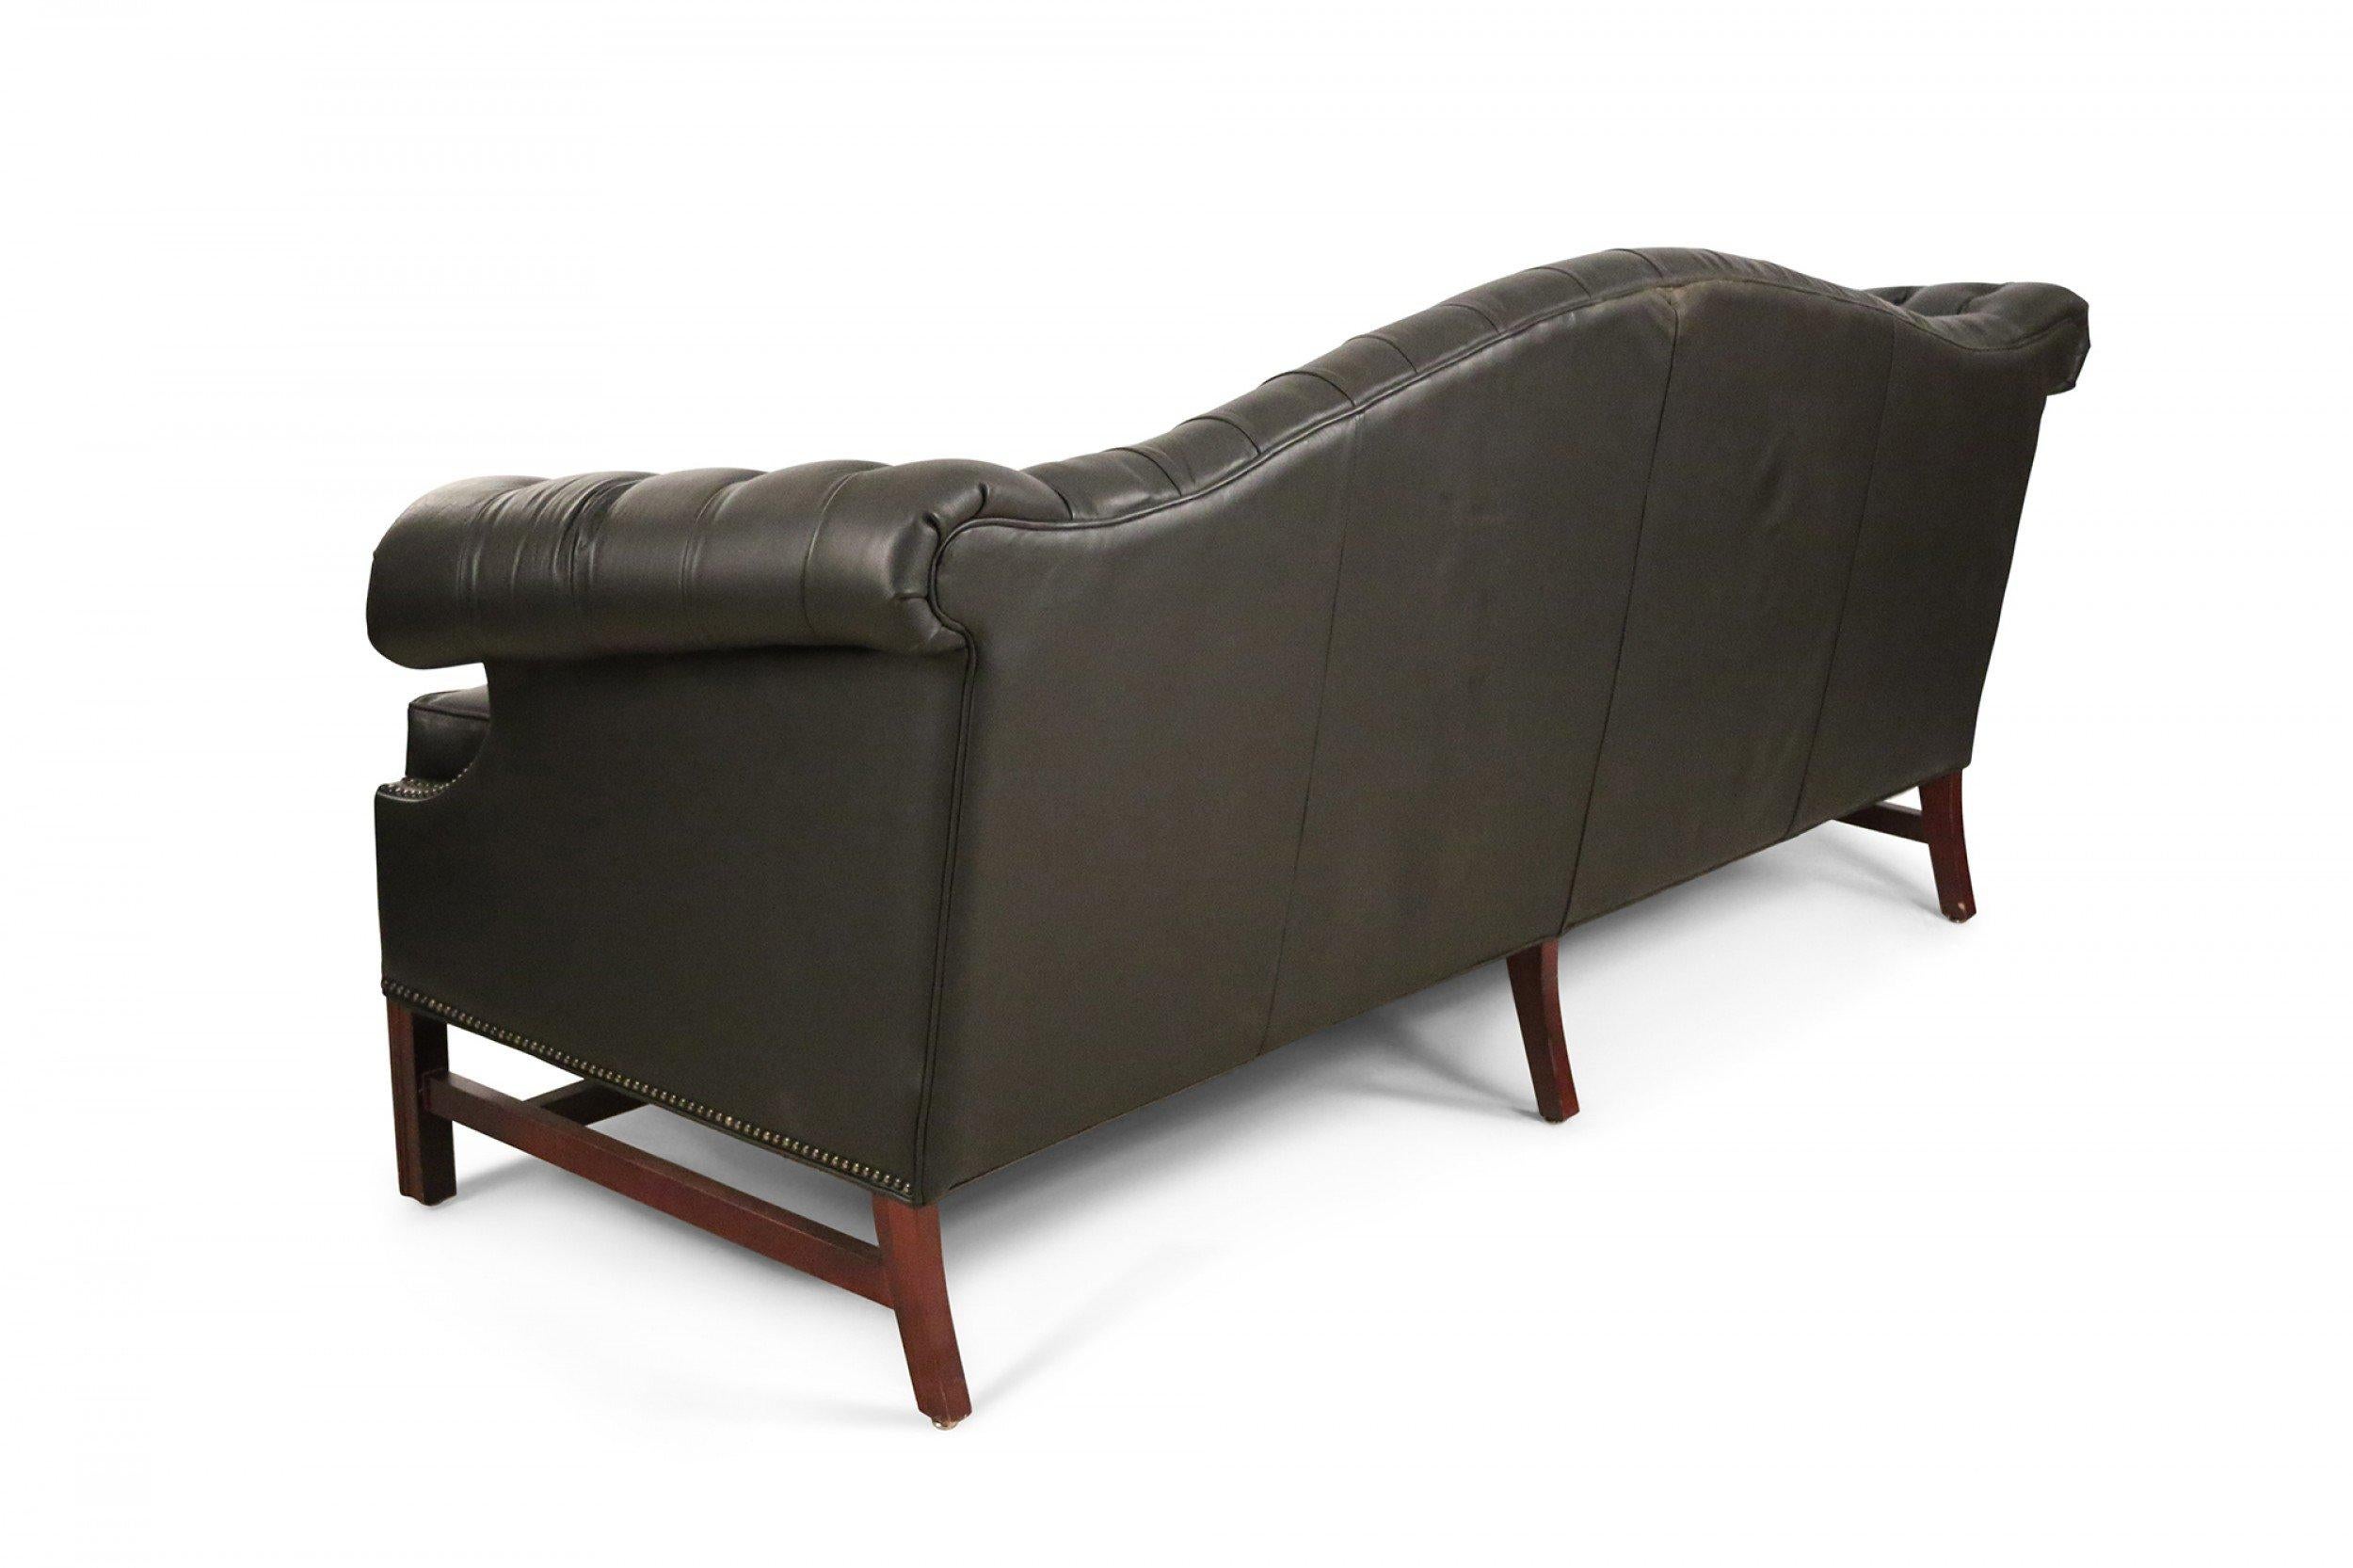 20th Century English Victorian Style Camel Back Black Tufted Leather Sofa For Sale